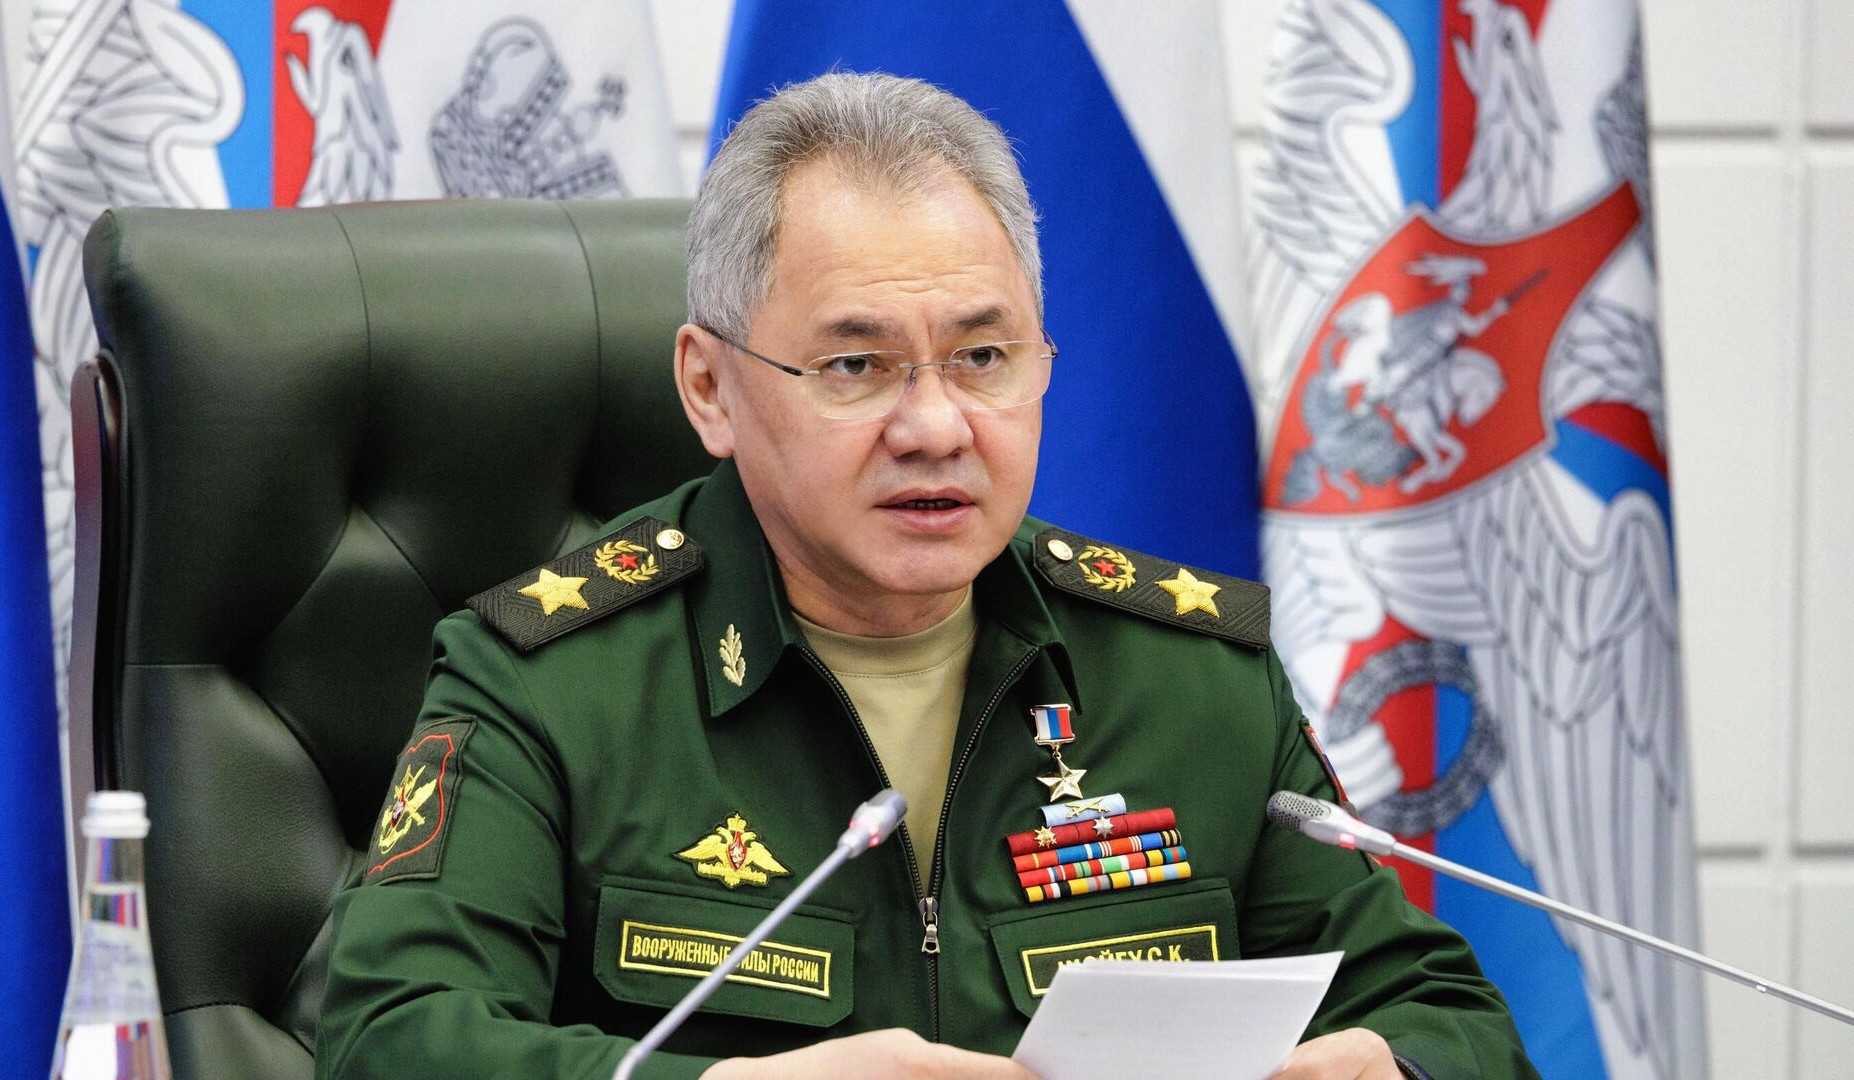 Ukraine plans to strike Crimea with HIMARS and Storm Shadow missiles, Shoigu says